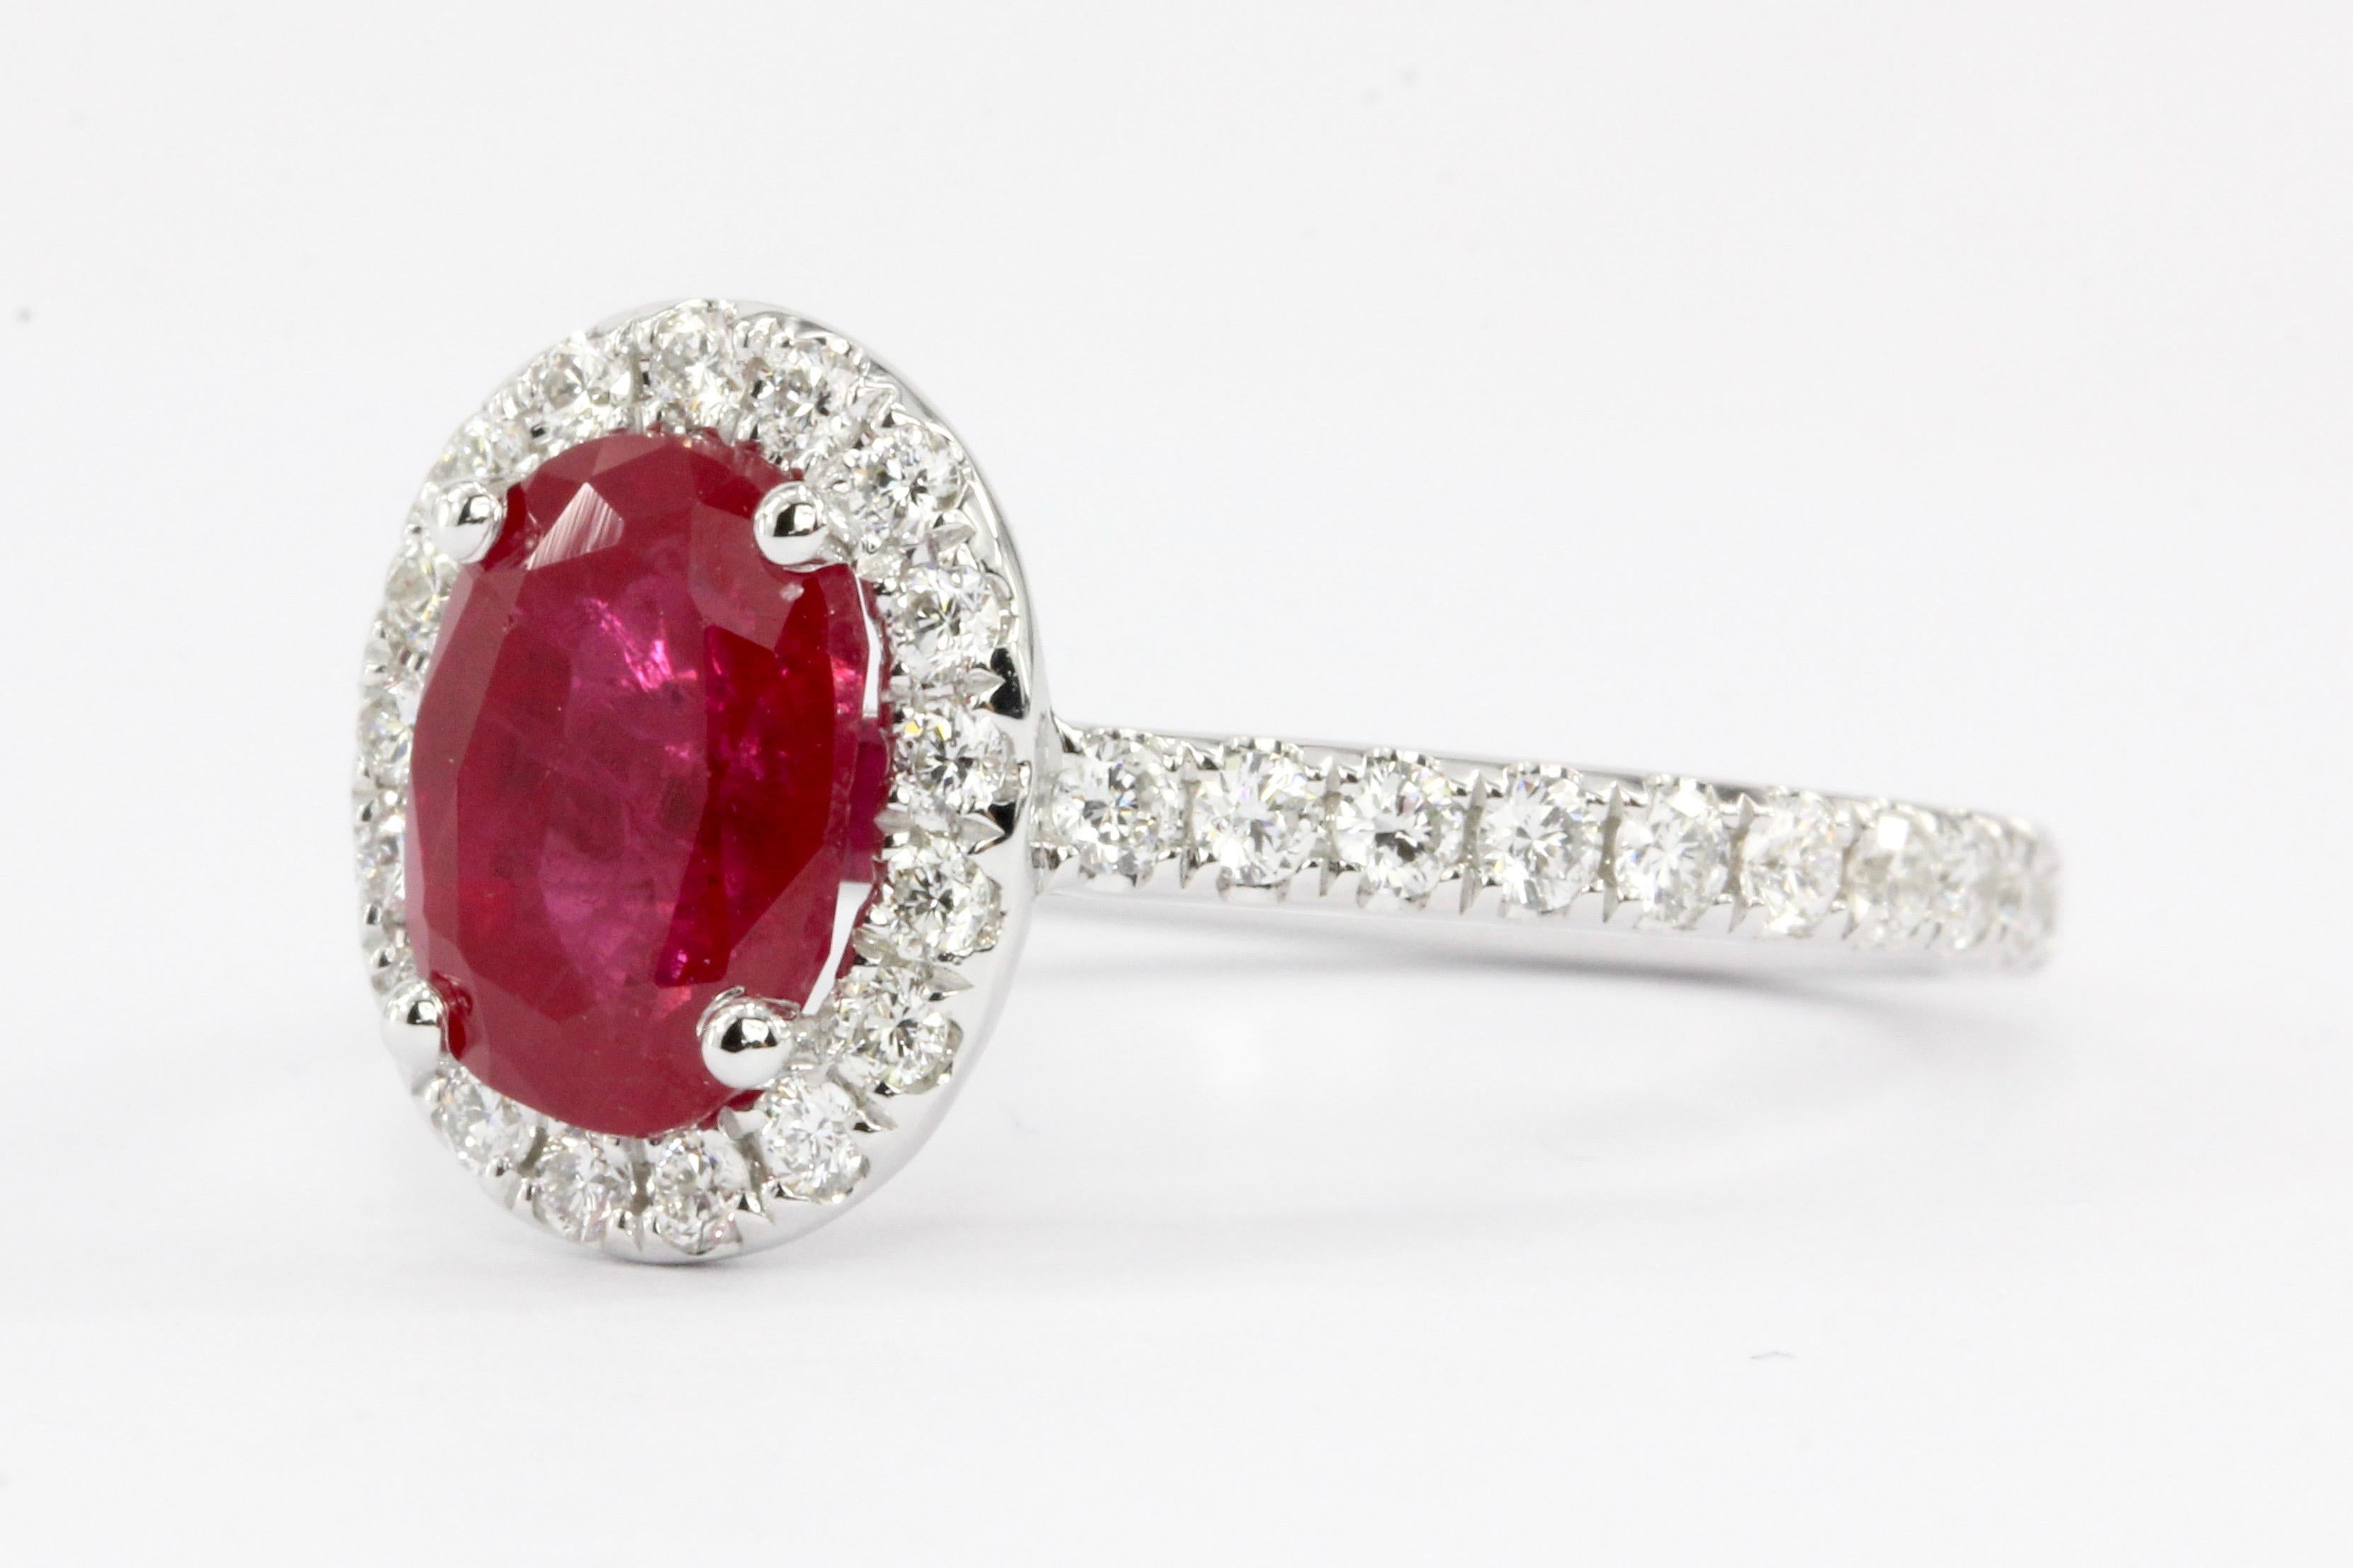 Era: Modern

Composition: 14K White Gold

Primary Stone: Natural Ruby

Carat Weight: 2.07 Carat 

Secondary Stone: Diamond

Carat Weight: .54 CTW

Color: G/H

Clarity: Vs2/Si1

Size: 6